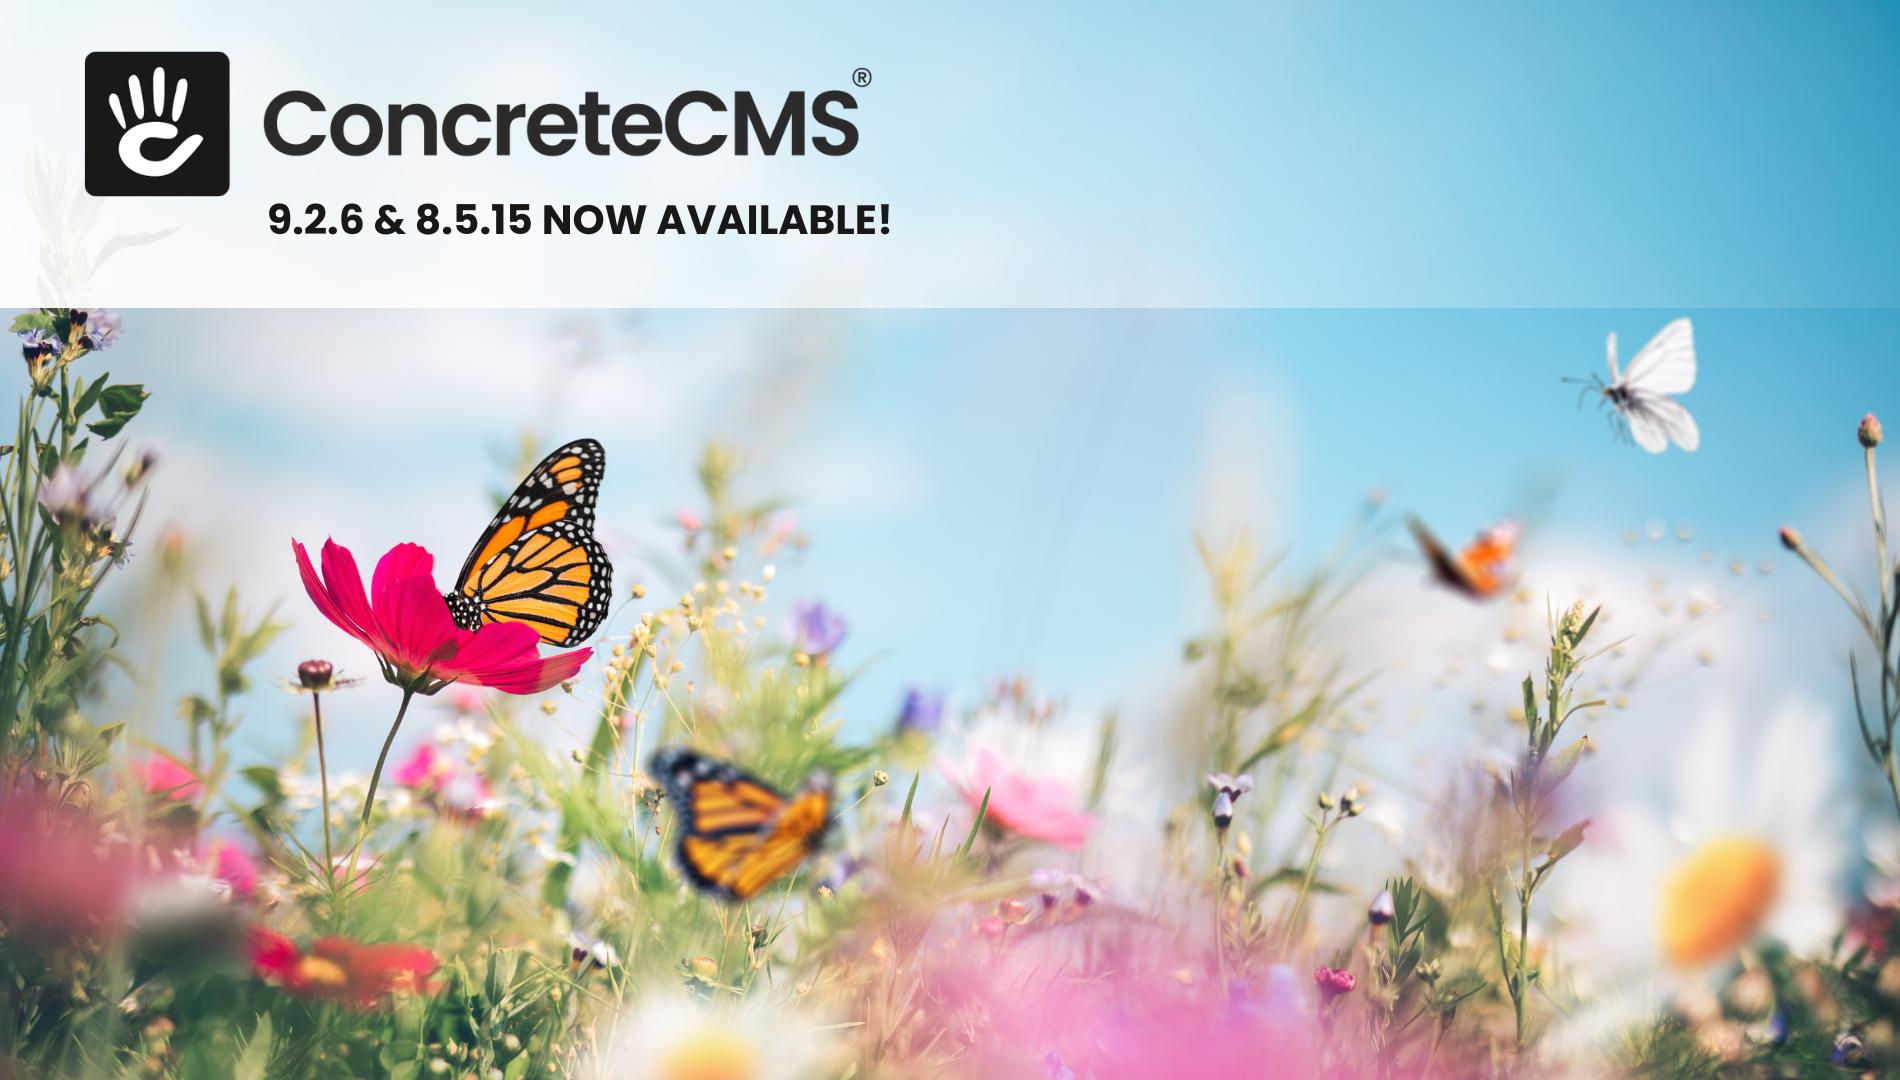 Announcing Concrete CMS 9.2.6 and 8.5.15 Release